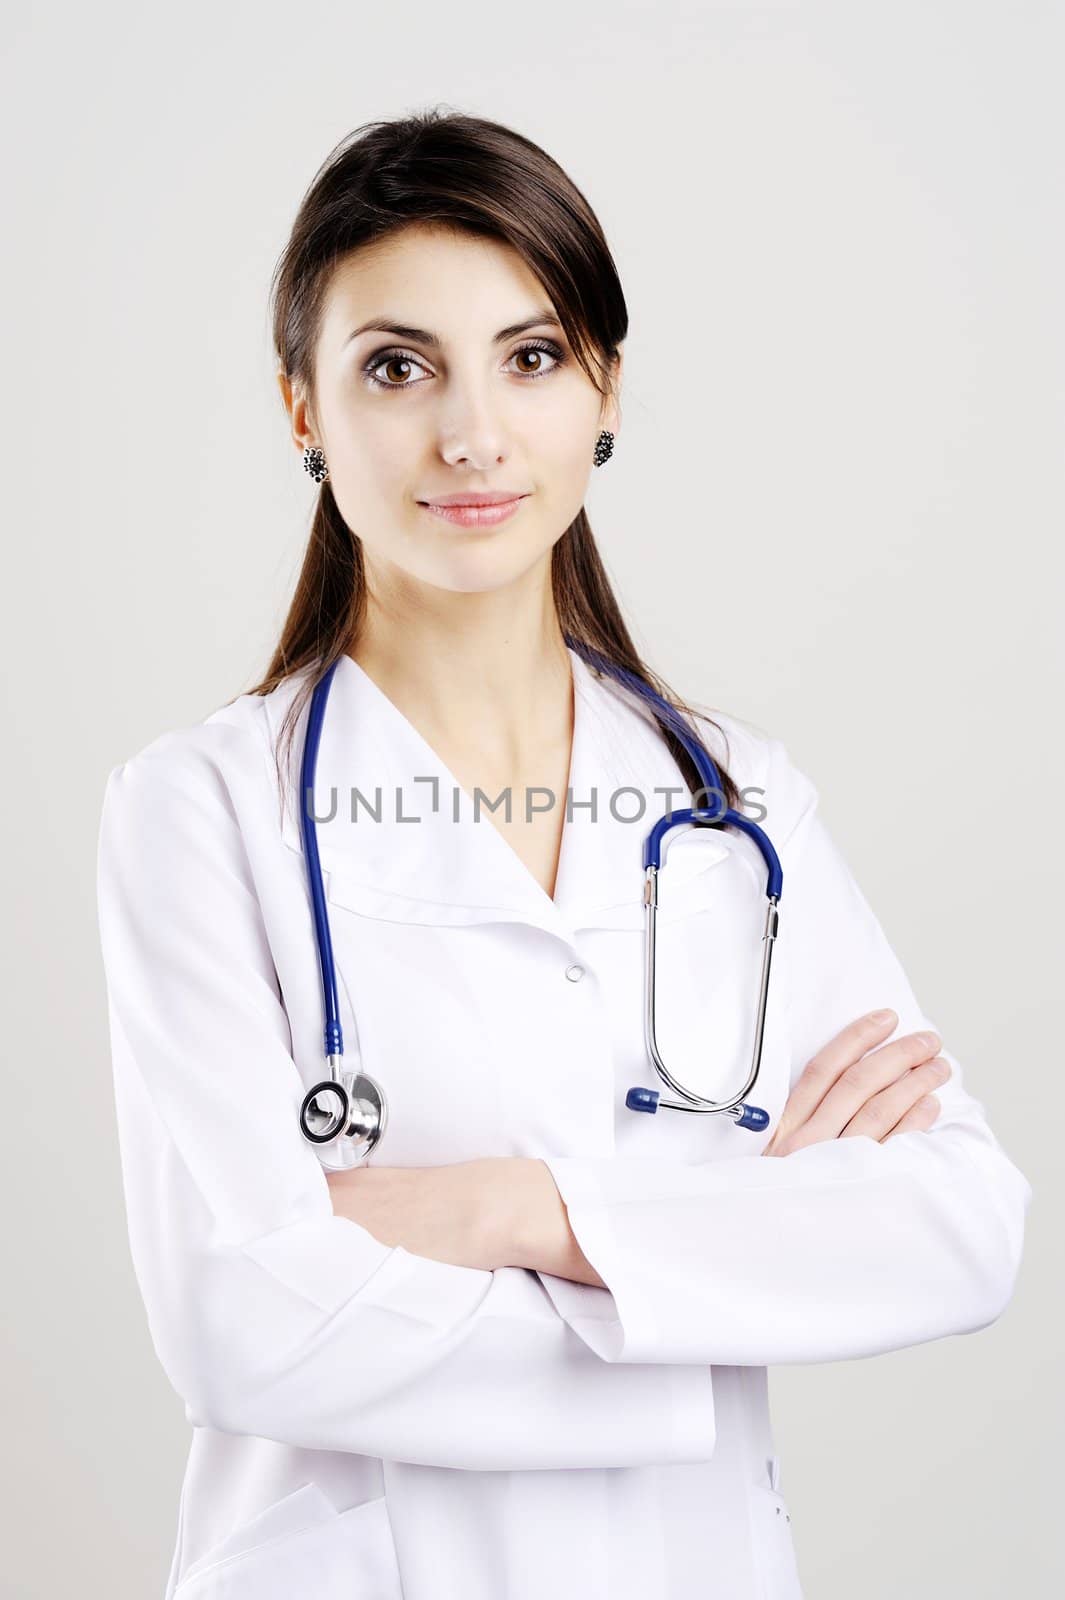 An image of young doctor with stethoscope